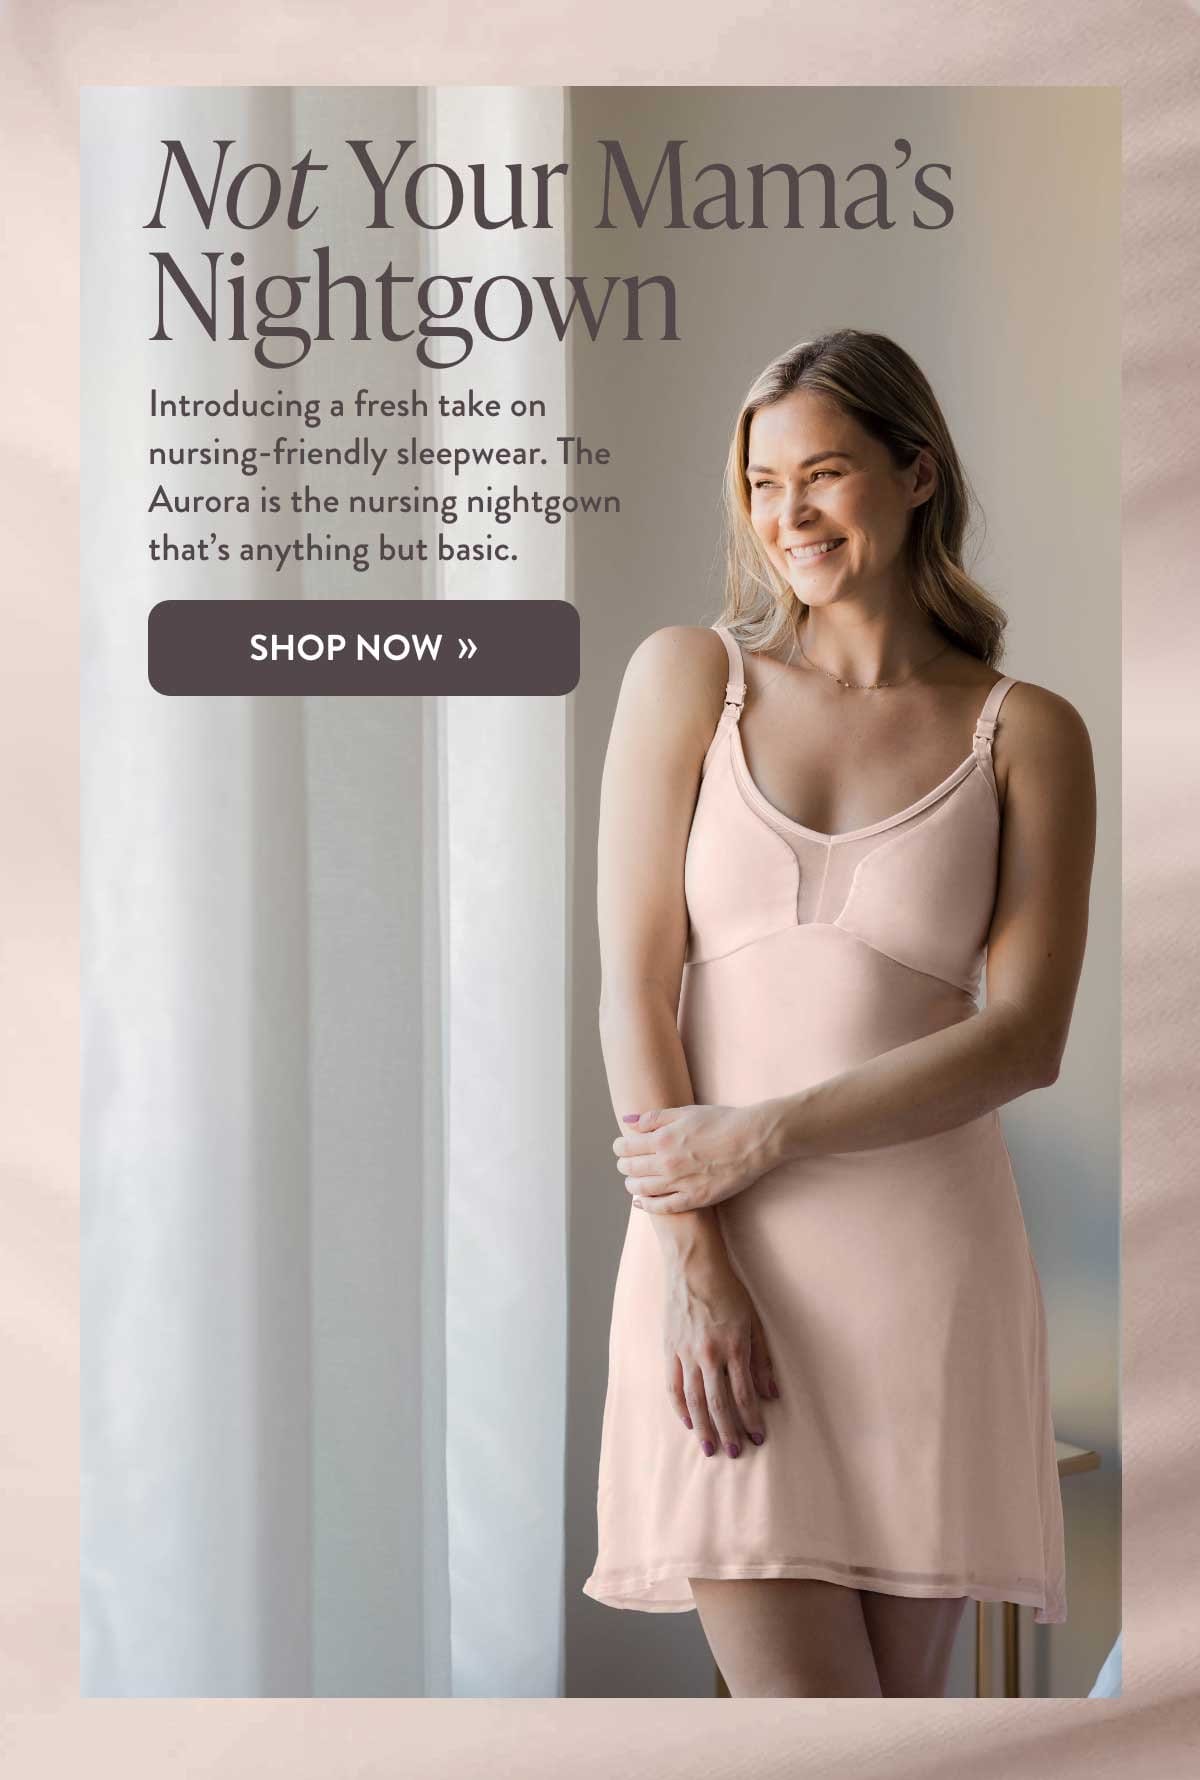 Introducing the nursing nightgown that's anything but basic.